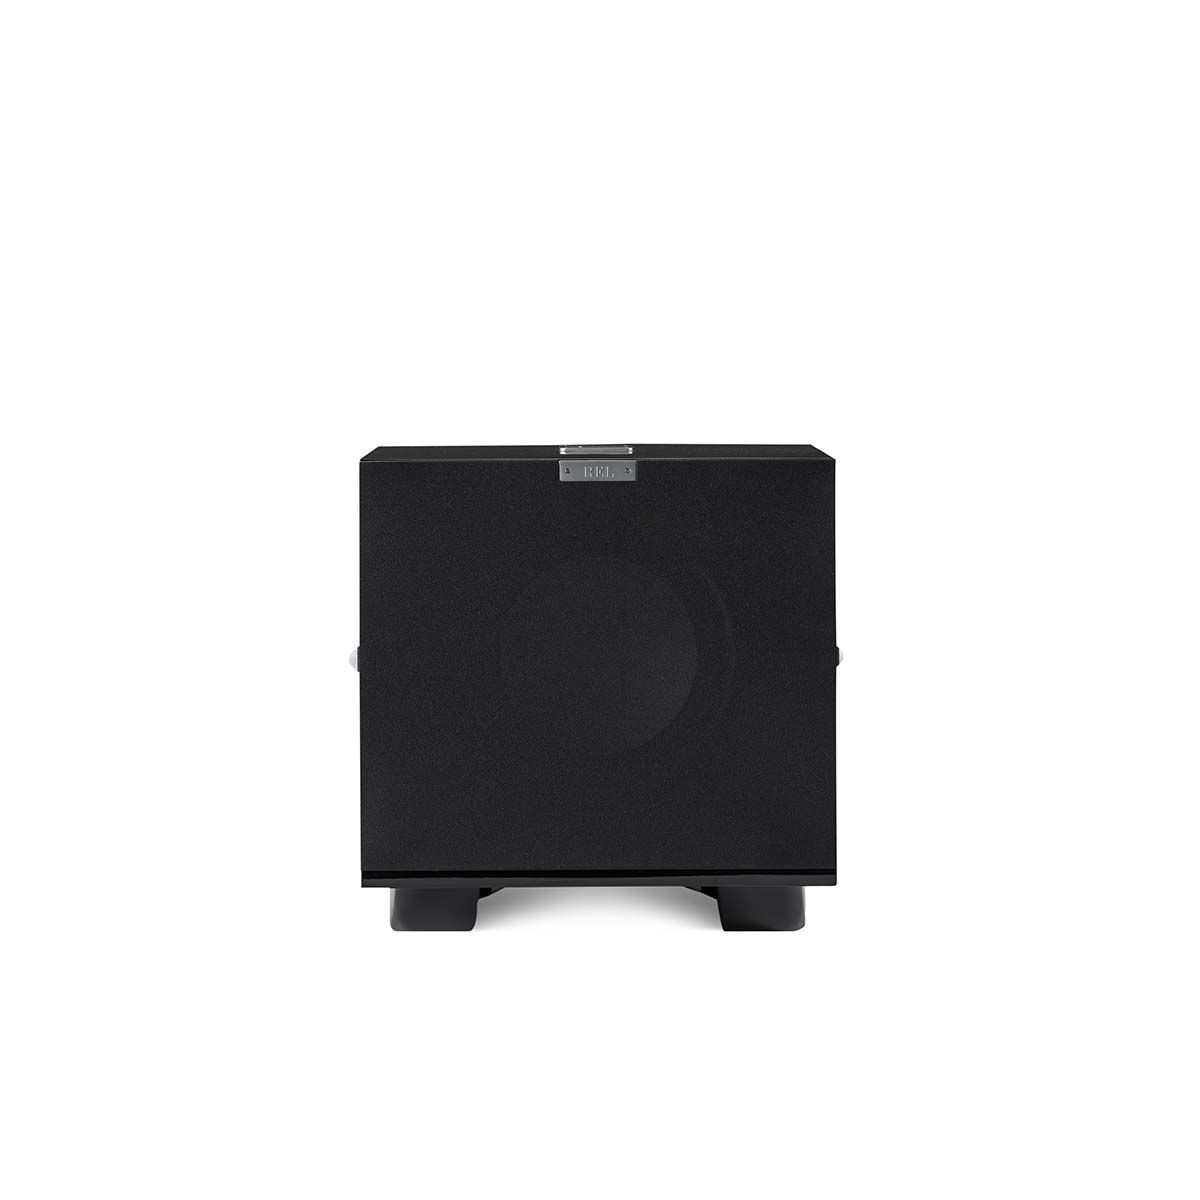 REL Acoustics S/510 Subwoofer, Black, front view with grille